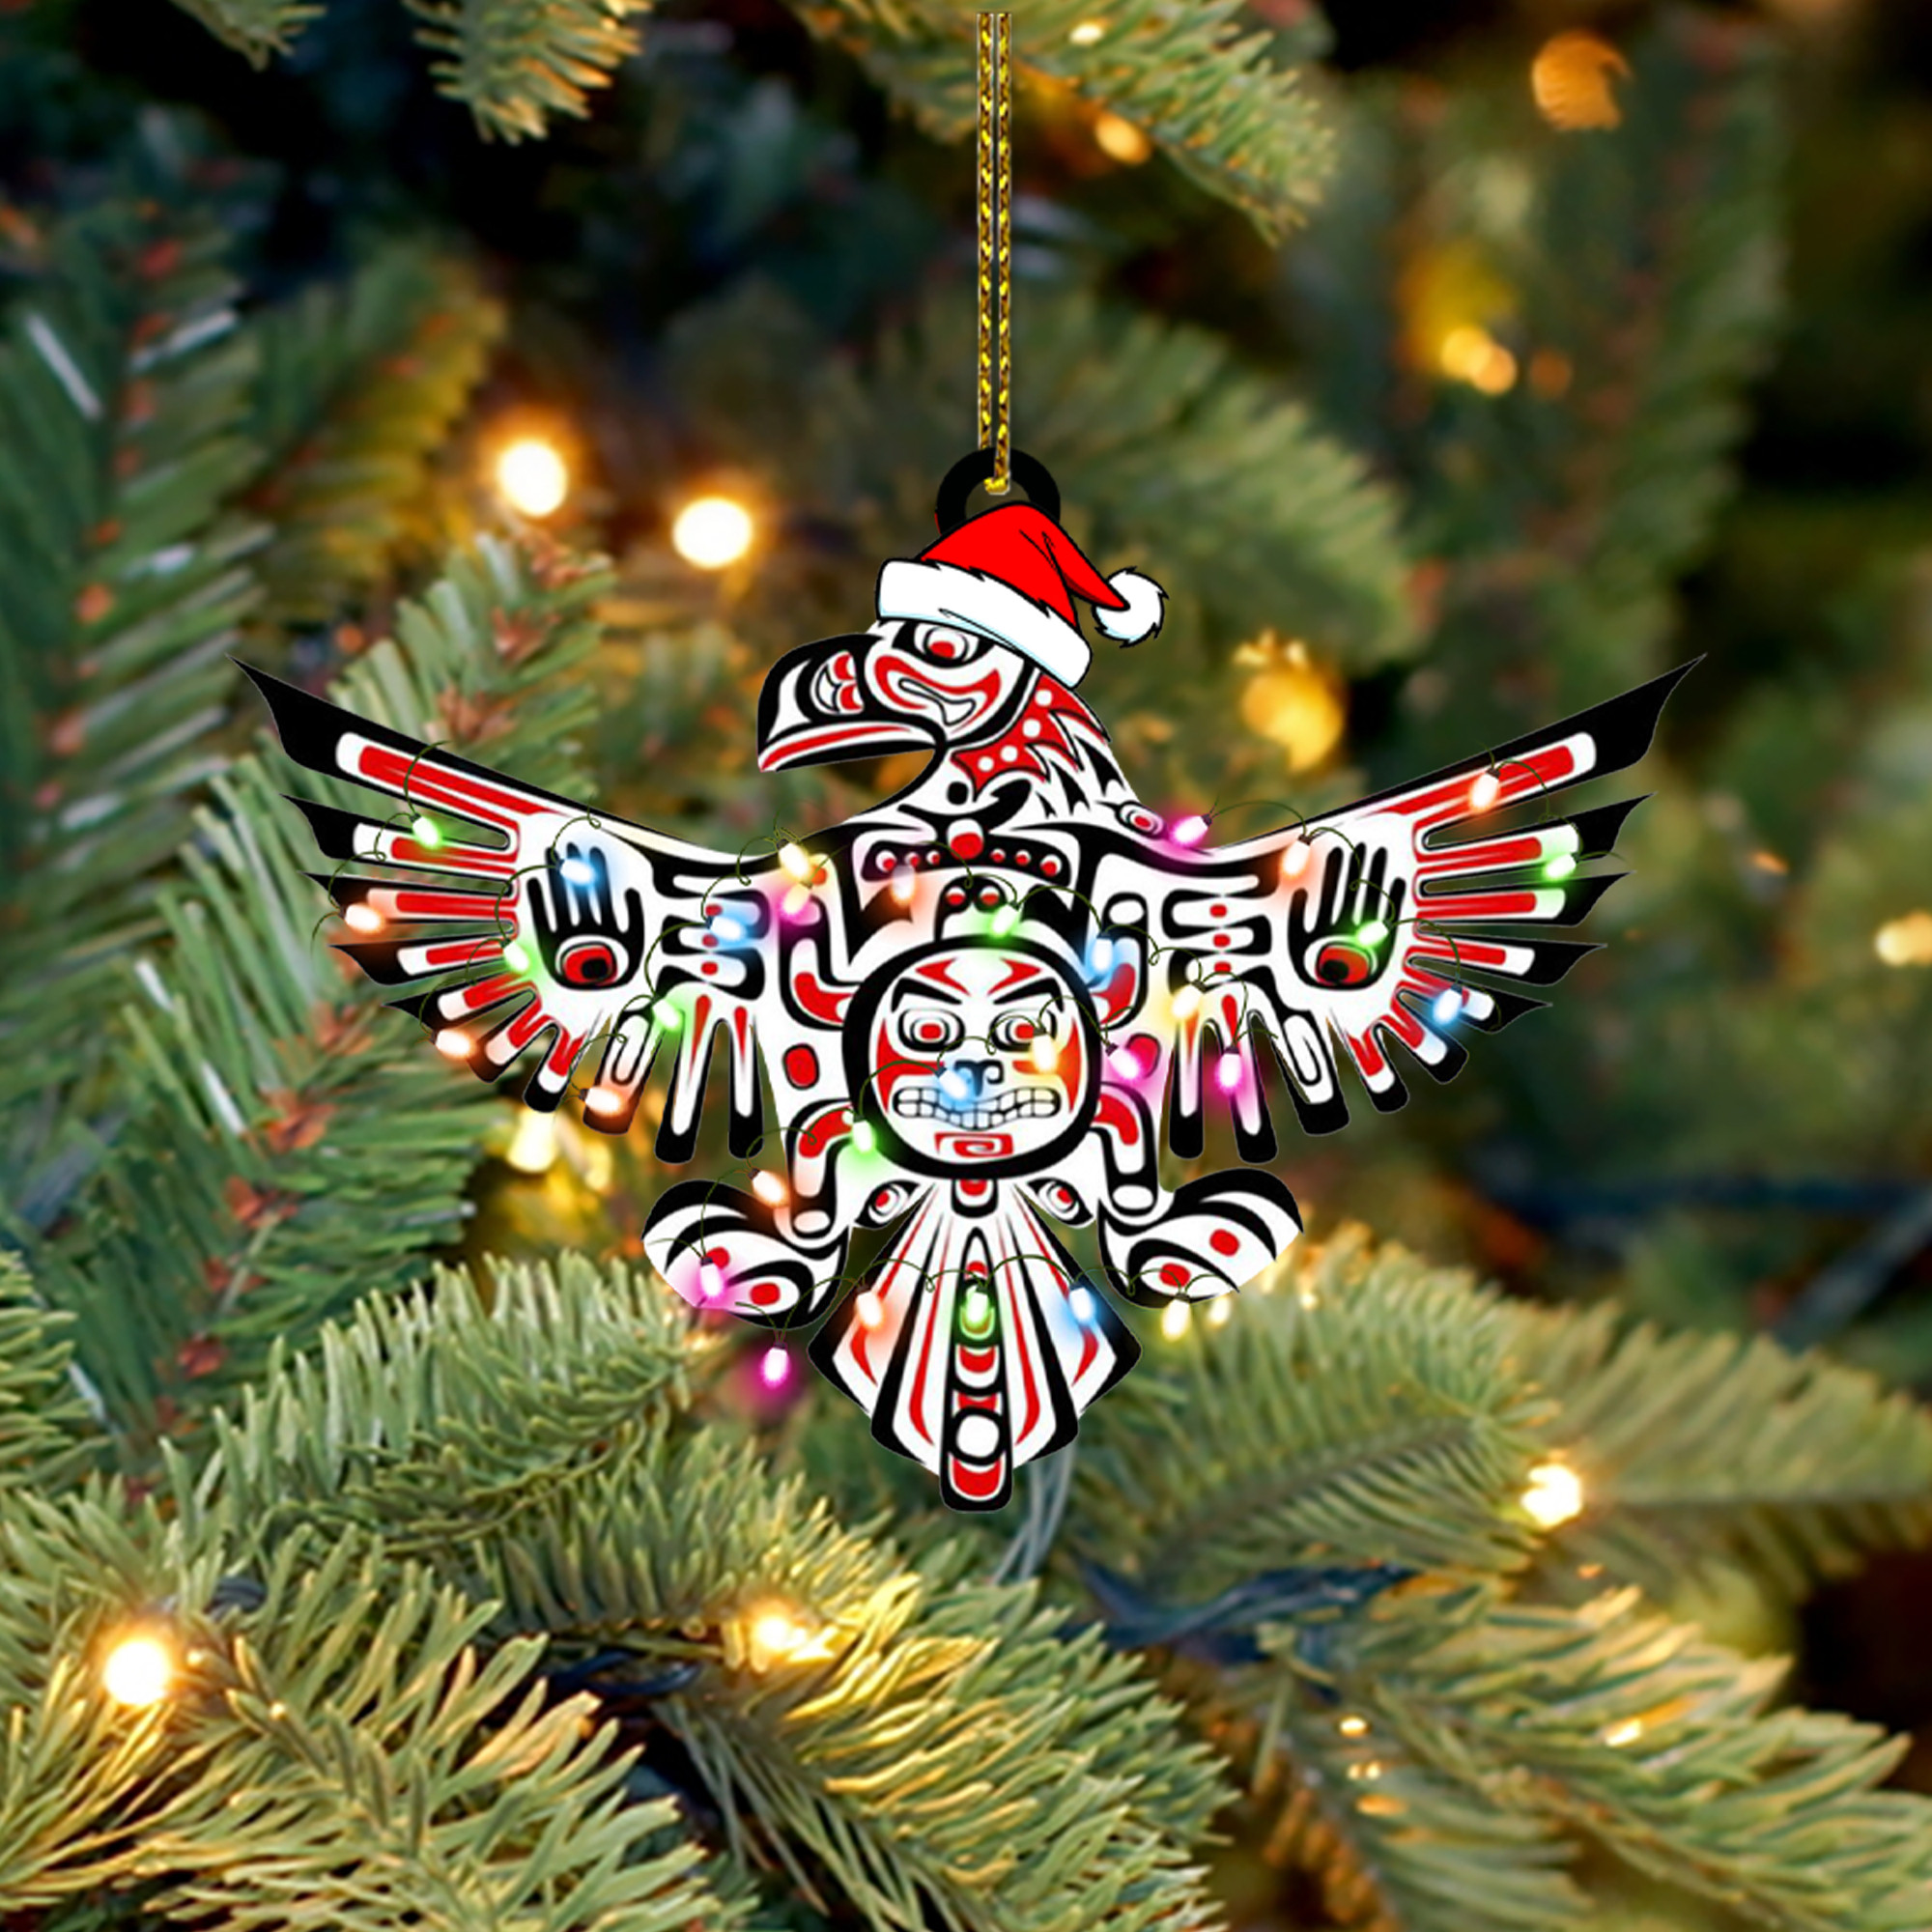 Eagle Tattoo Spirit Ornament Xmas Tree Decorations For 2022 Gifts